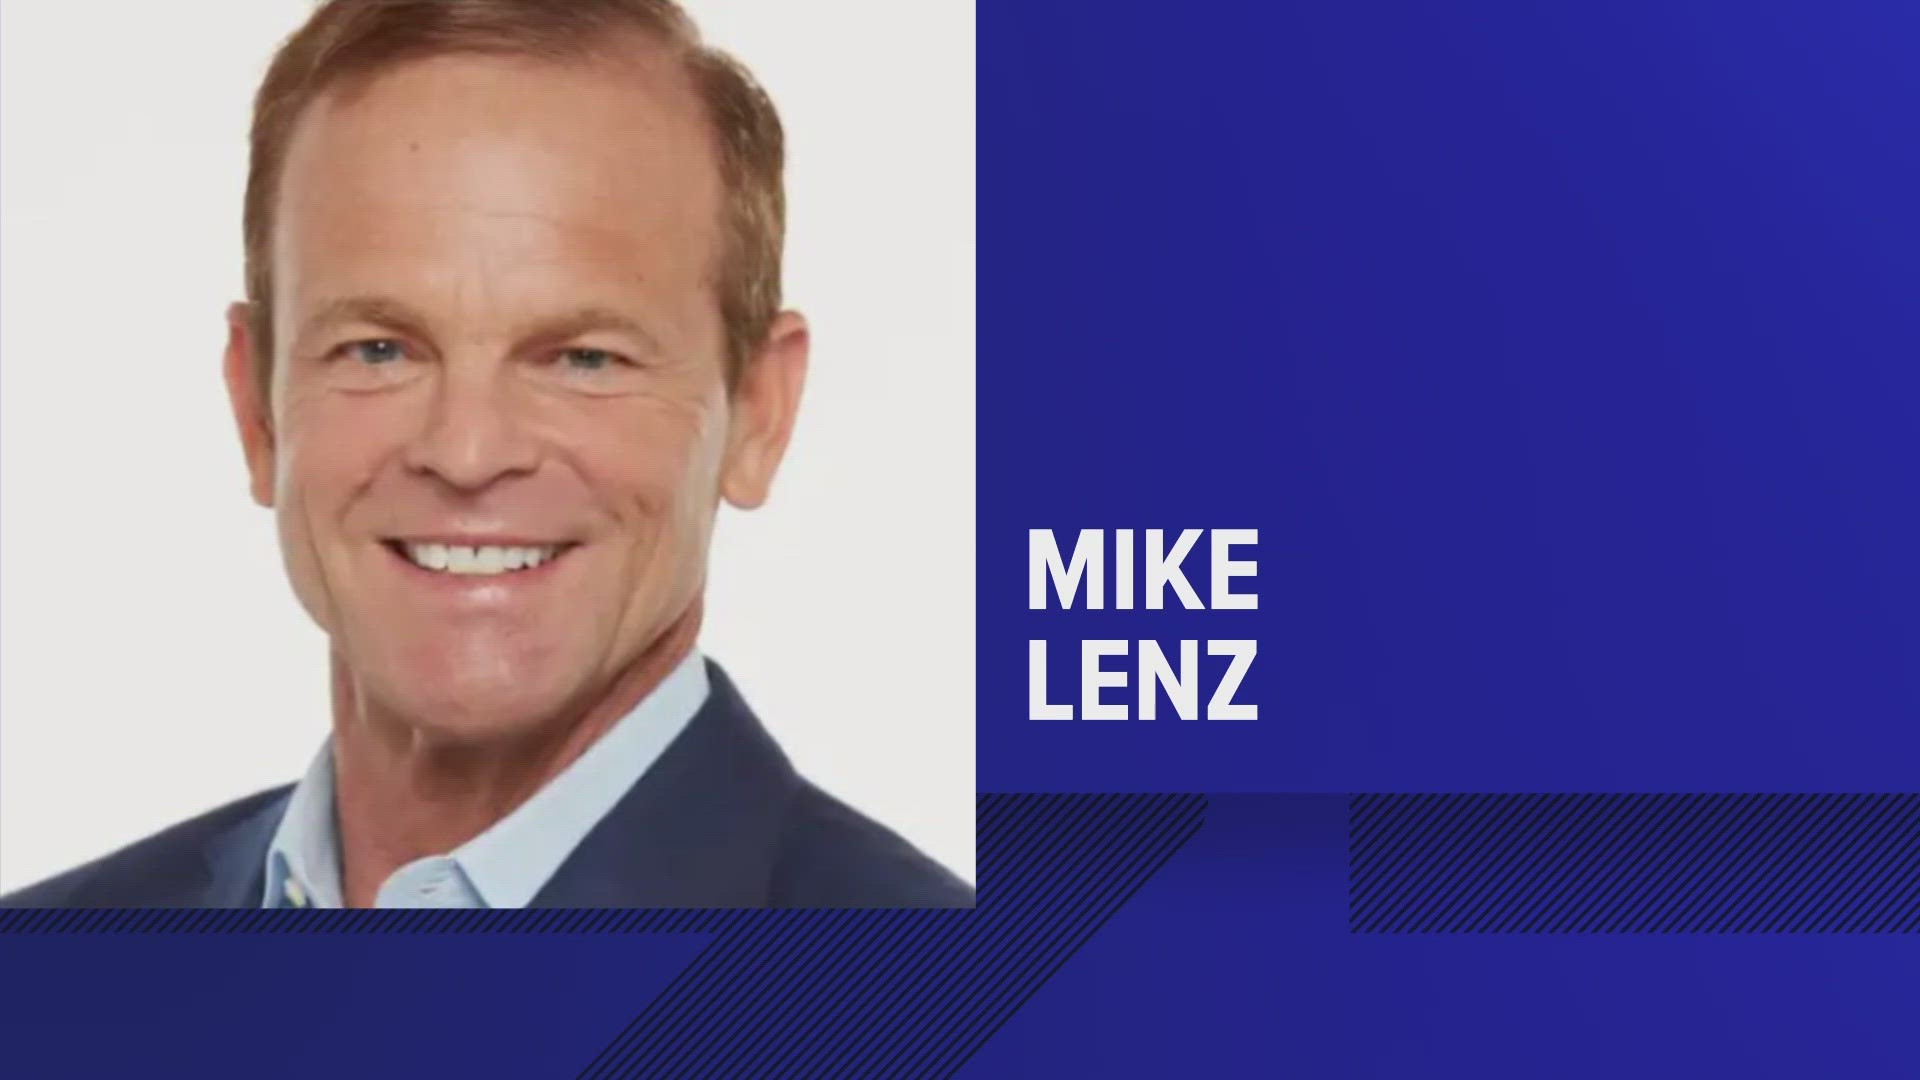 Mike Lenz has been with FedEx since 2005. The company announced Tuesday he's retiring.